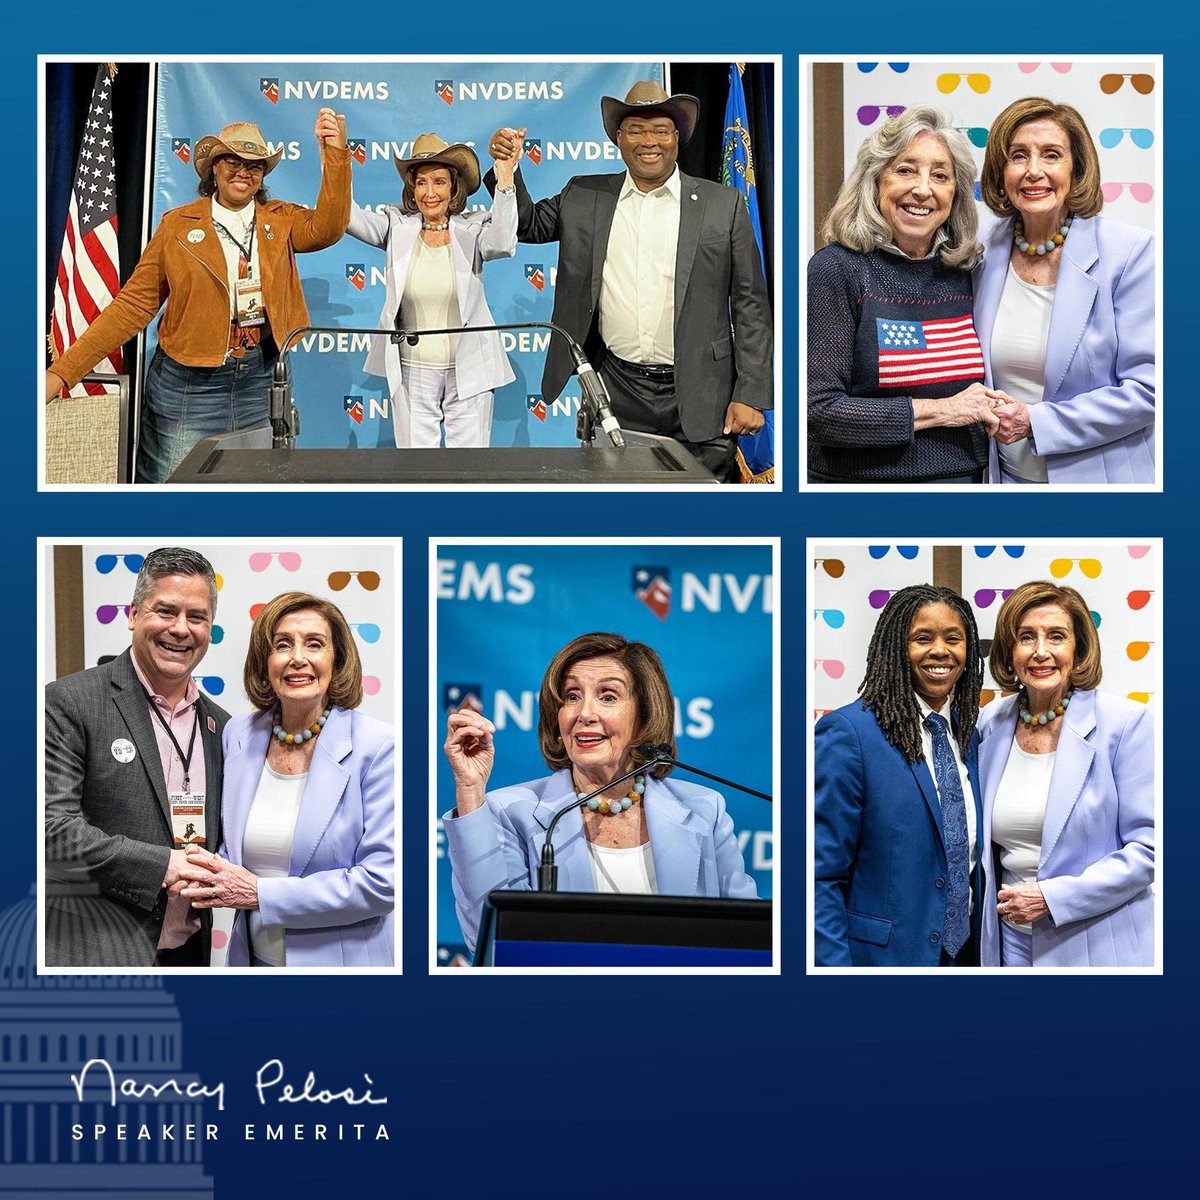 The Road to Roevember begins in the West with @azdemparty and @nvdems! Working together for our shared values, Democrats will retake the House, hold the Senate and reelect #BidenHarris For The People and for our freedoms! -NP